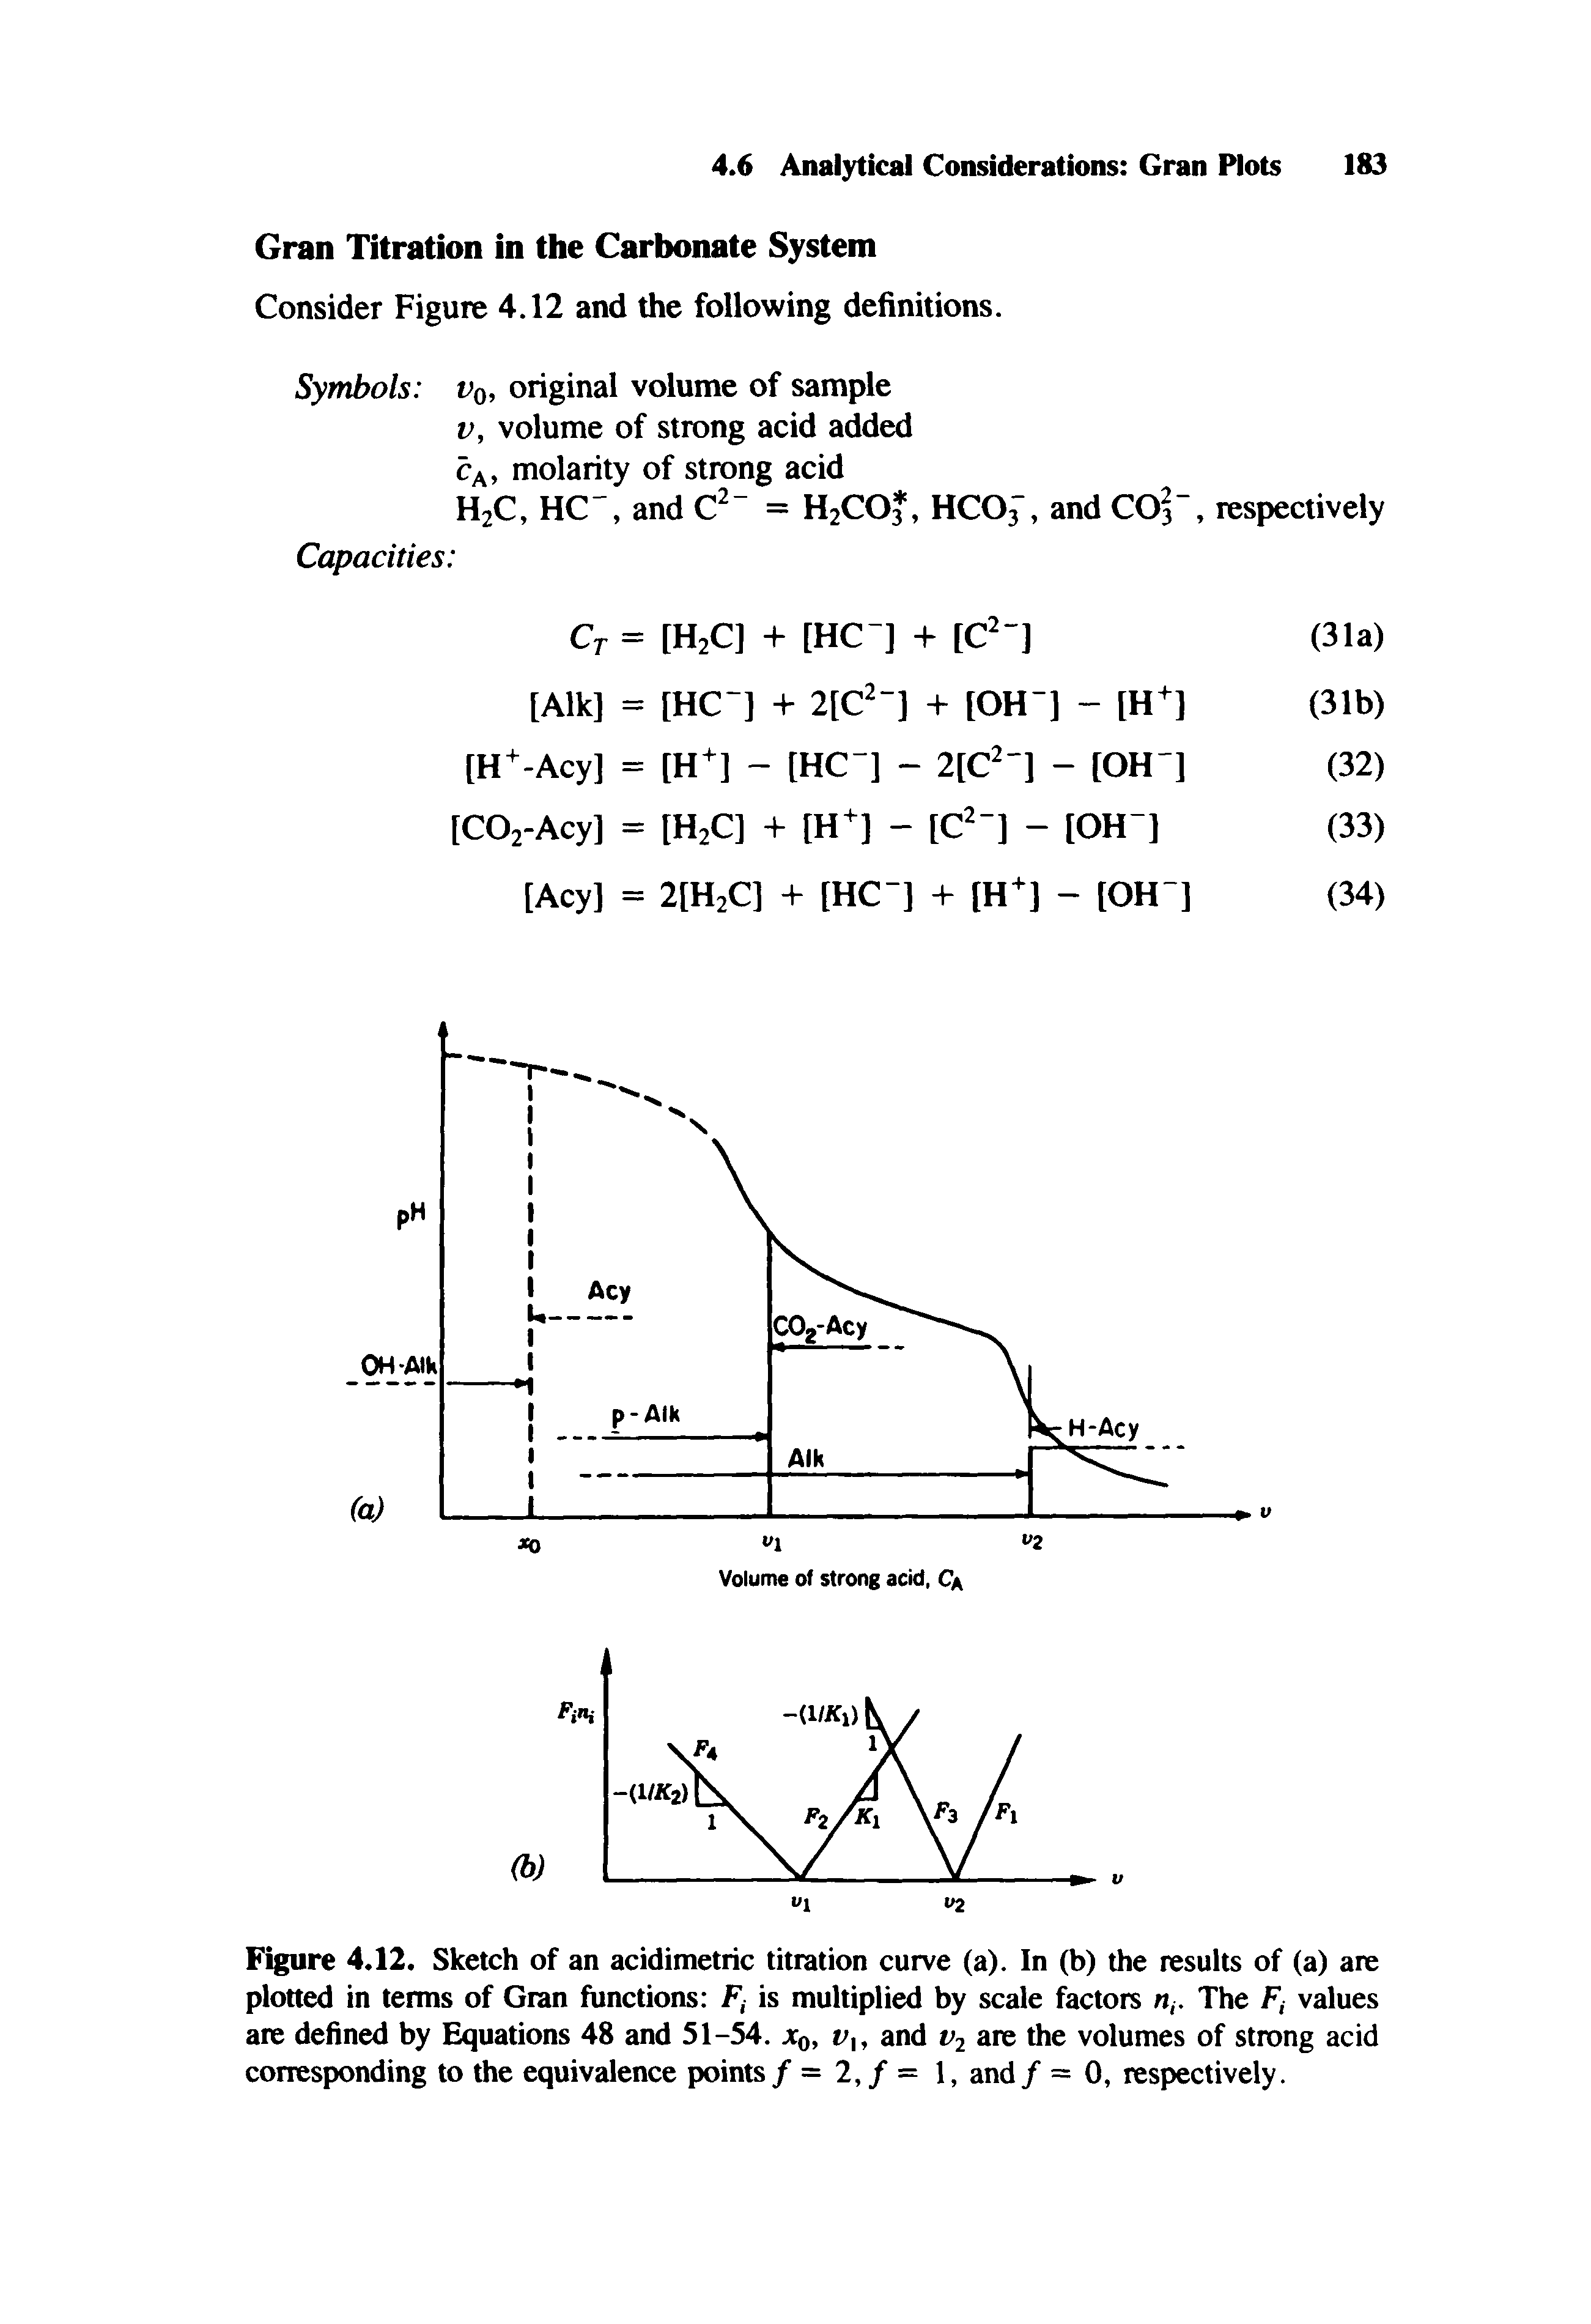 Figure 4.12. Sketch of an acidimetric titration curve (a). In (b) the results of (a) are plotted in terms of Gian functions F, is multiplied by scale factors The F, values are defined by Equations 48 and 51-54. Xq, r , and v-i are the volumes of strong acid corresponding to the equivalence points / = 2,/ = 1, and / = 0, respectively.